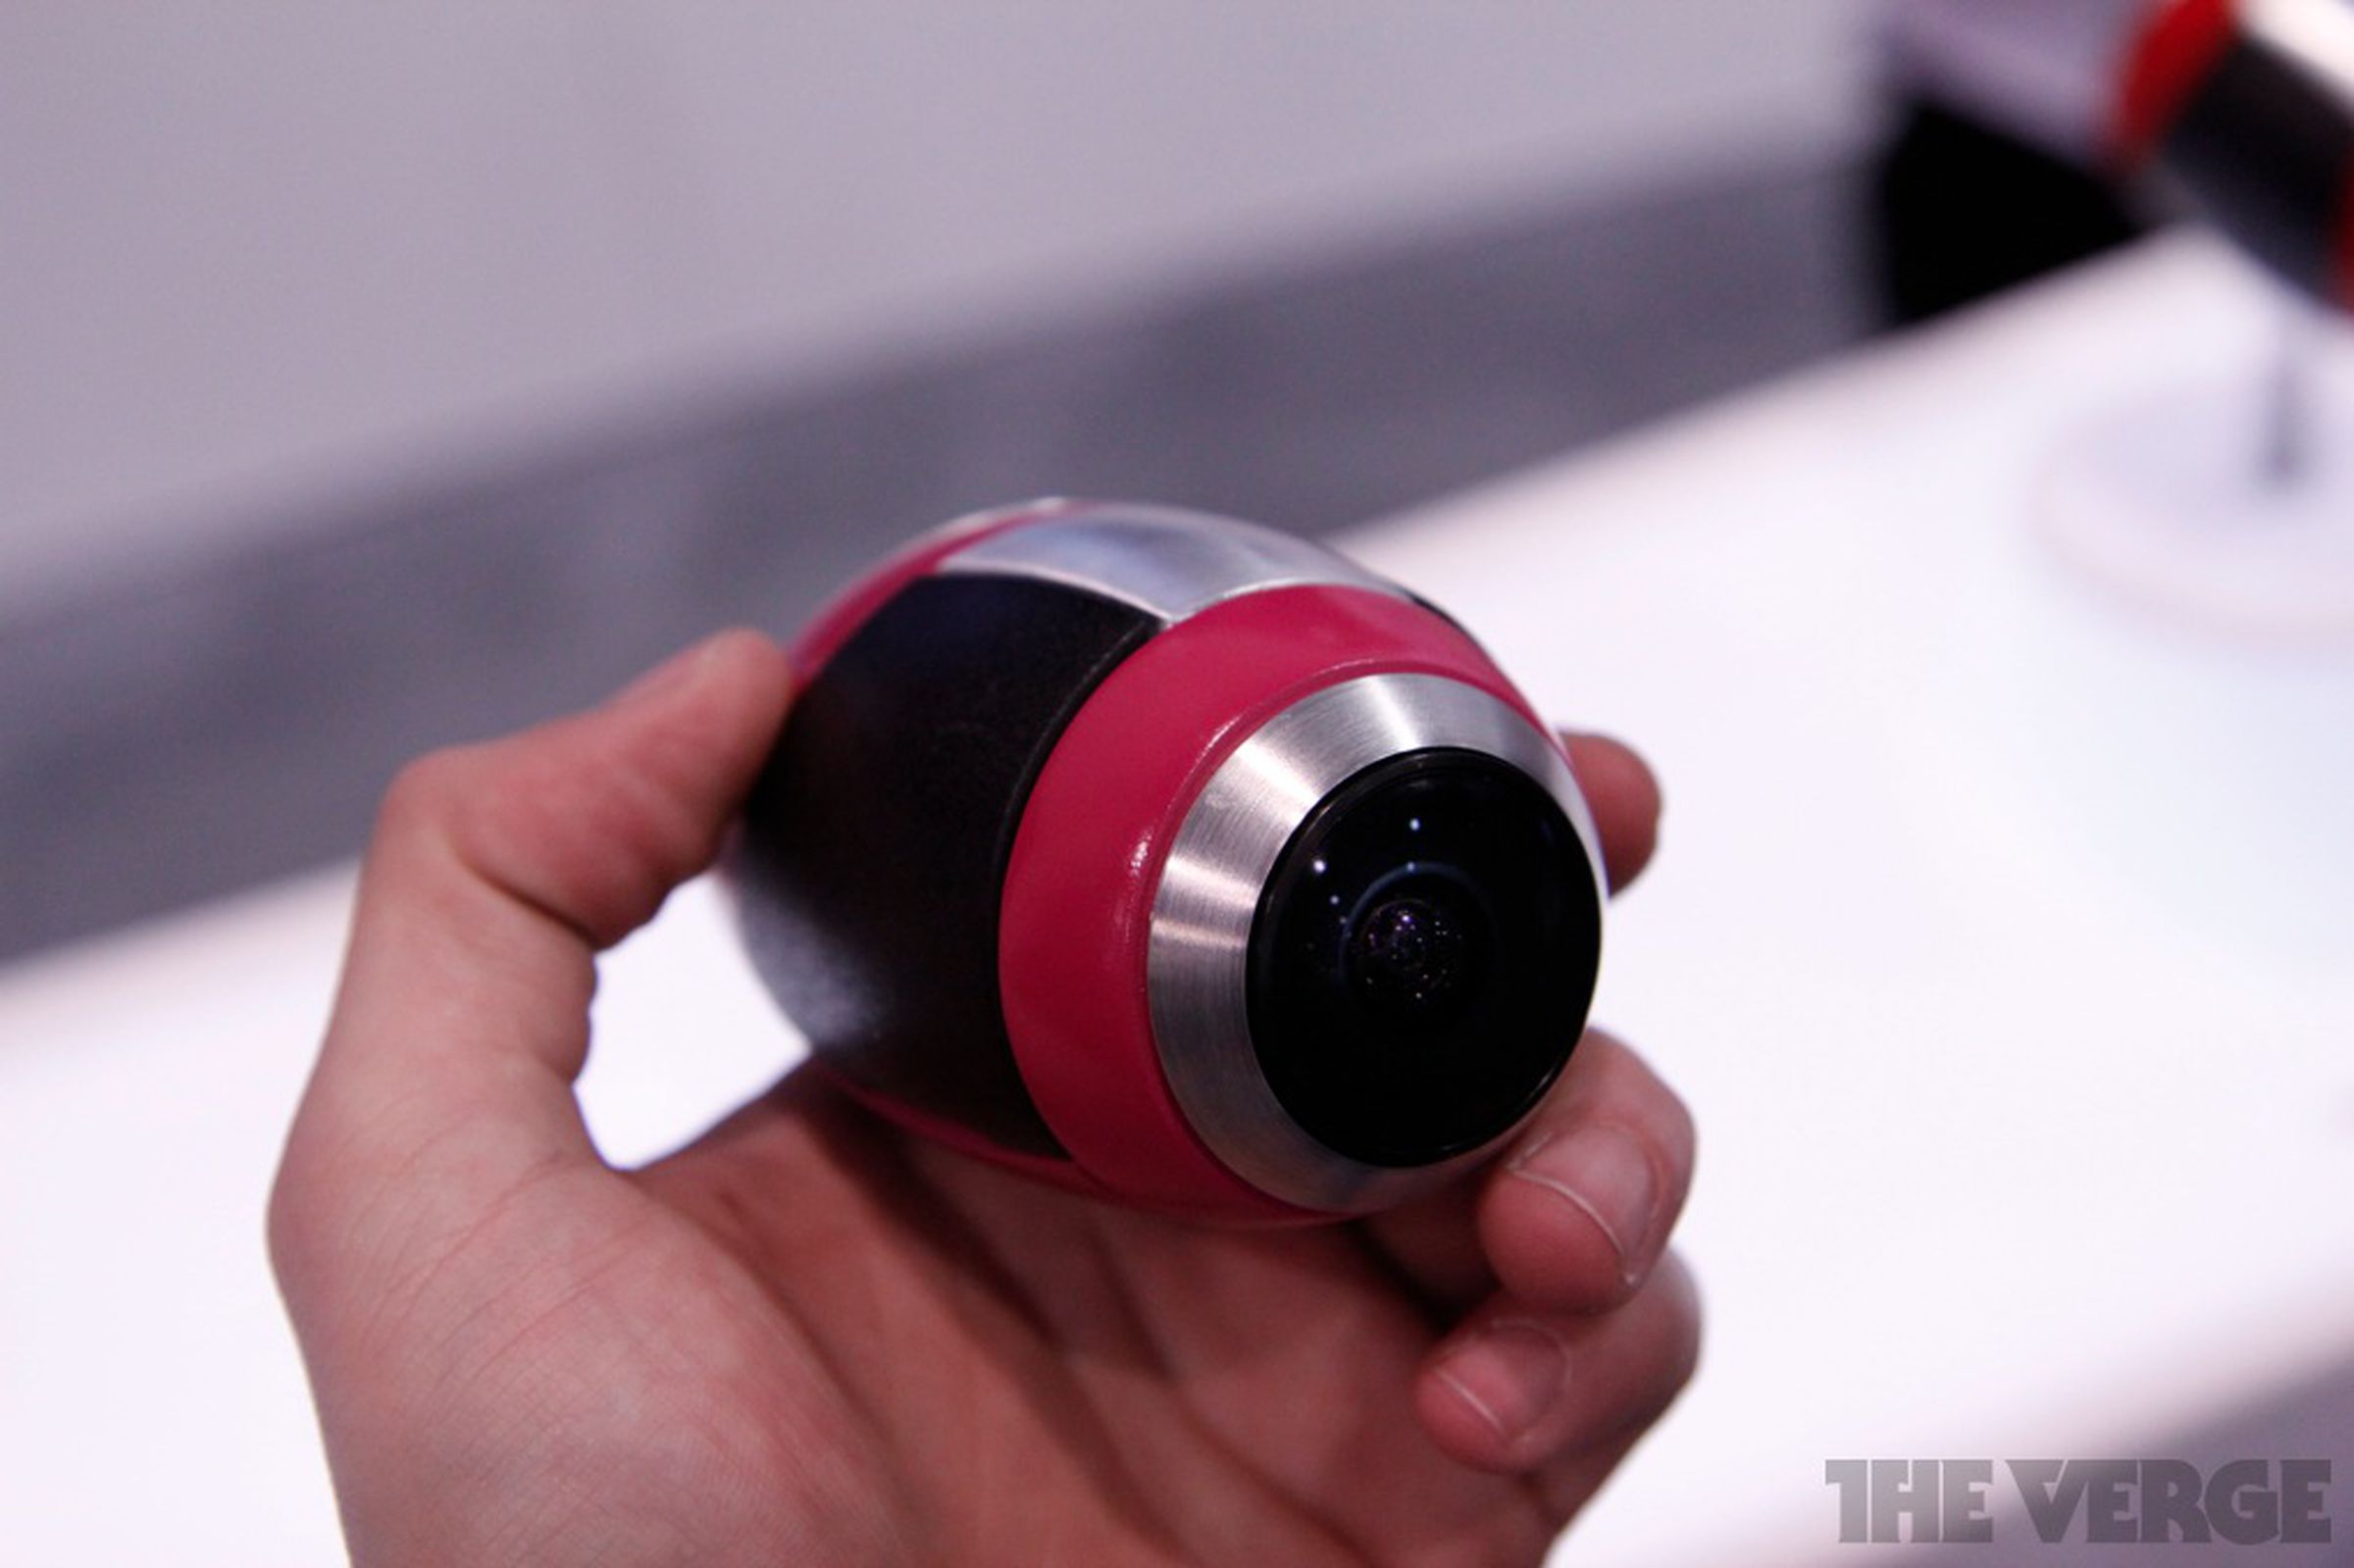 Tamaggo 360-imager prototype hands-on pictures